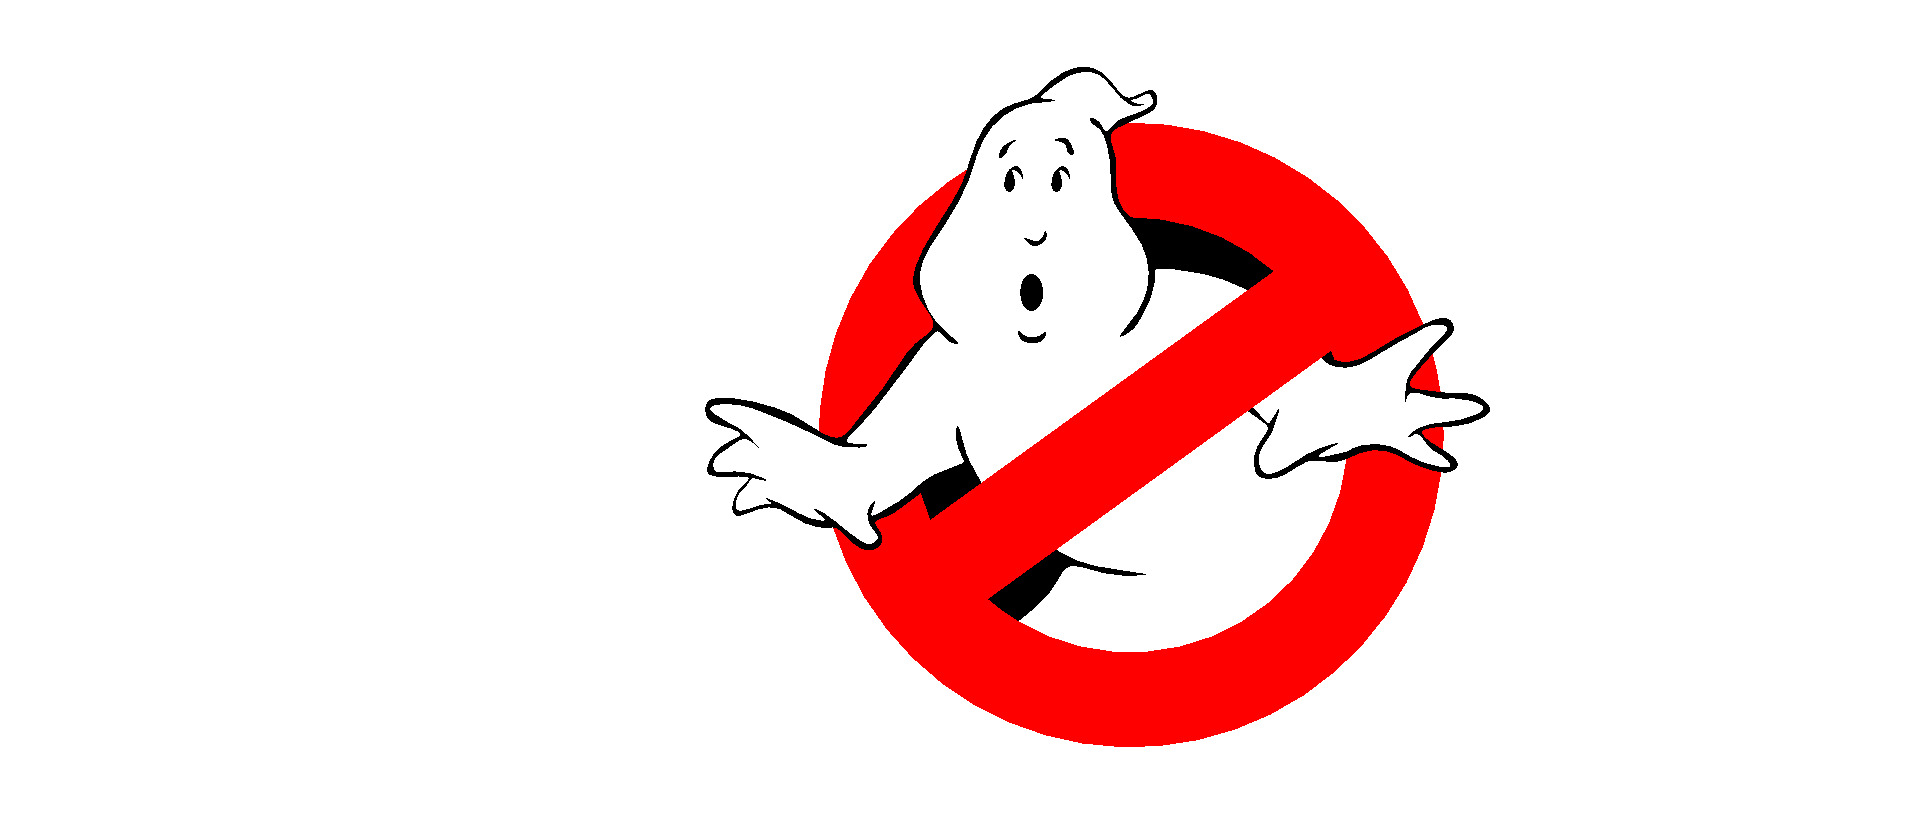 Ghostbusters' Is a Much Scarier Series Than We Care to Admit | by E Thomas  Schock | Fanfare